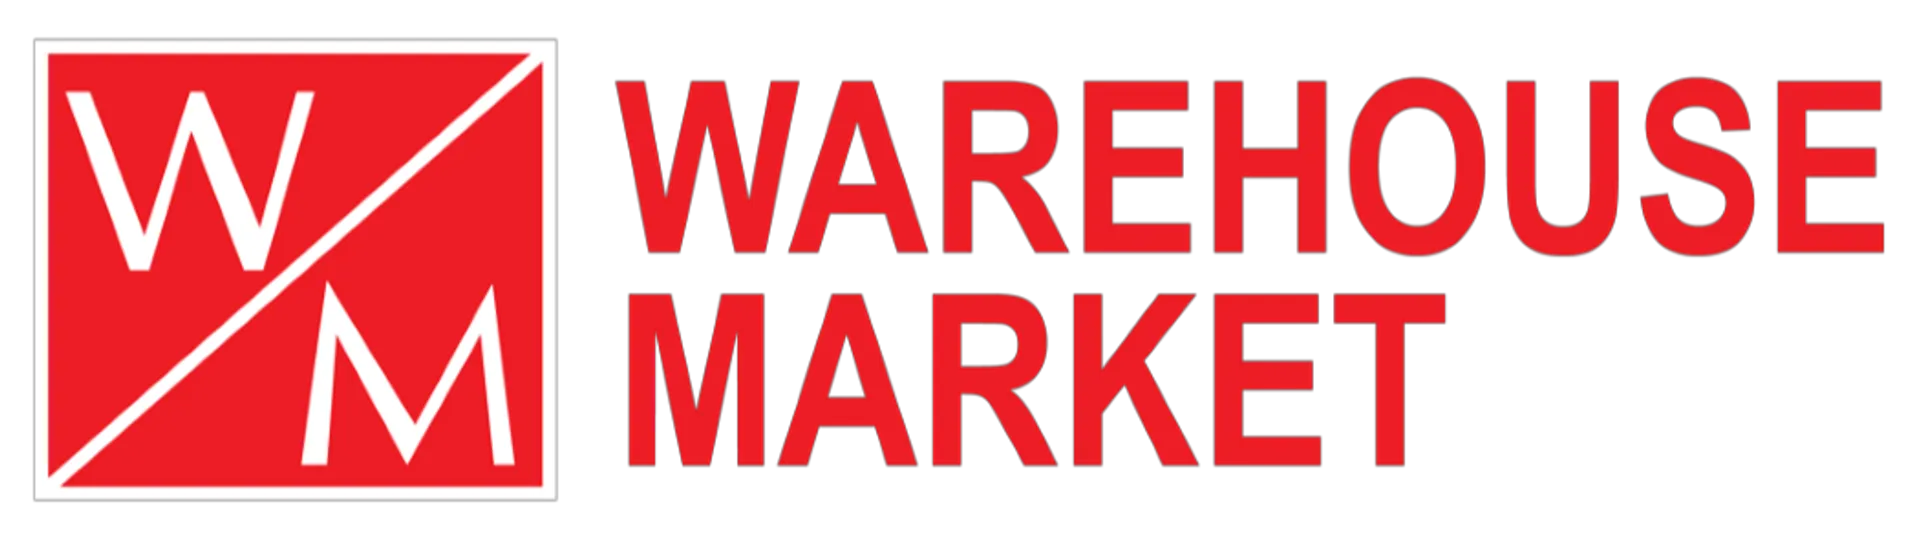 WAREHOUSE MARKET logo current weekly ad